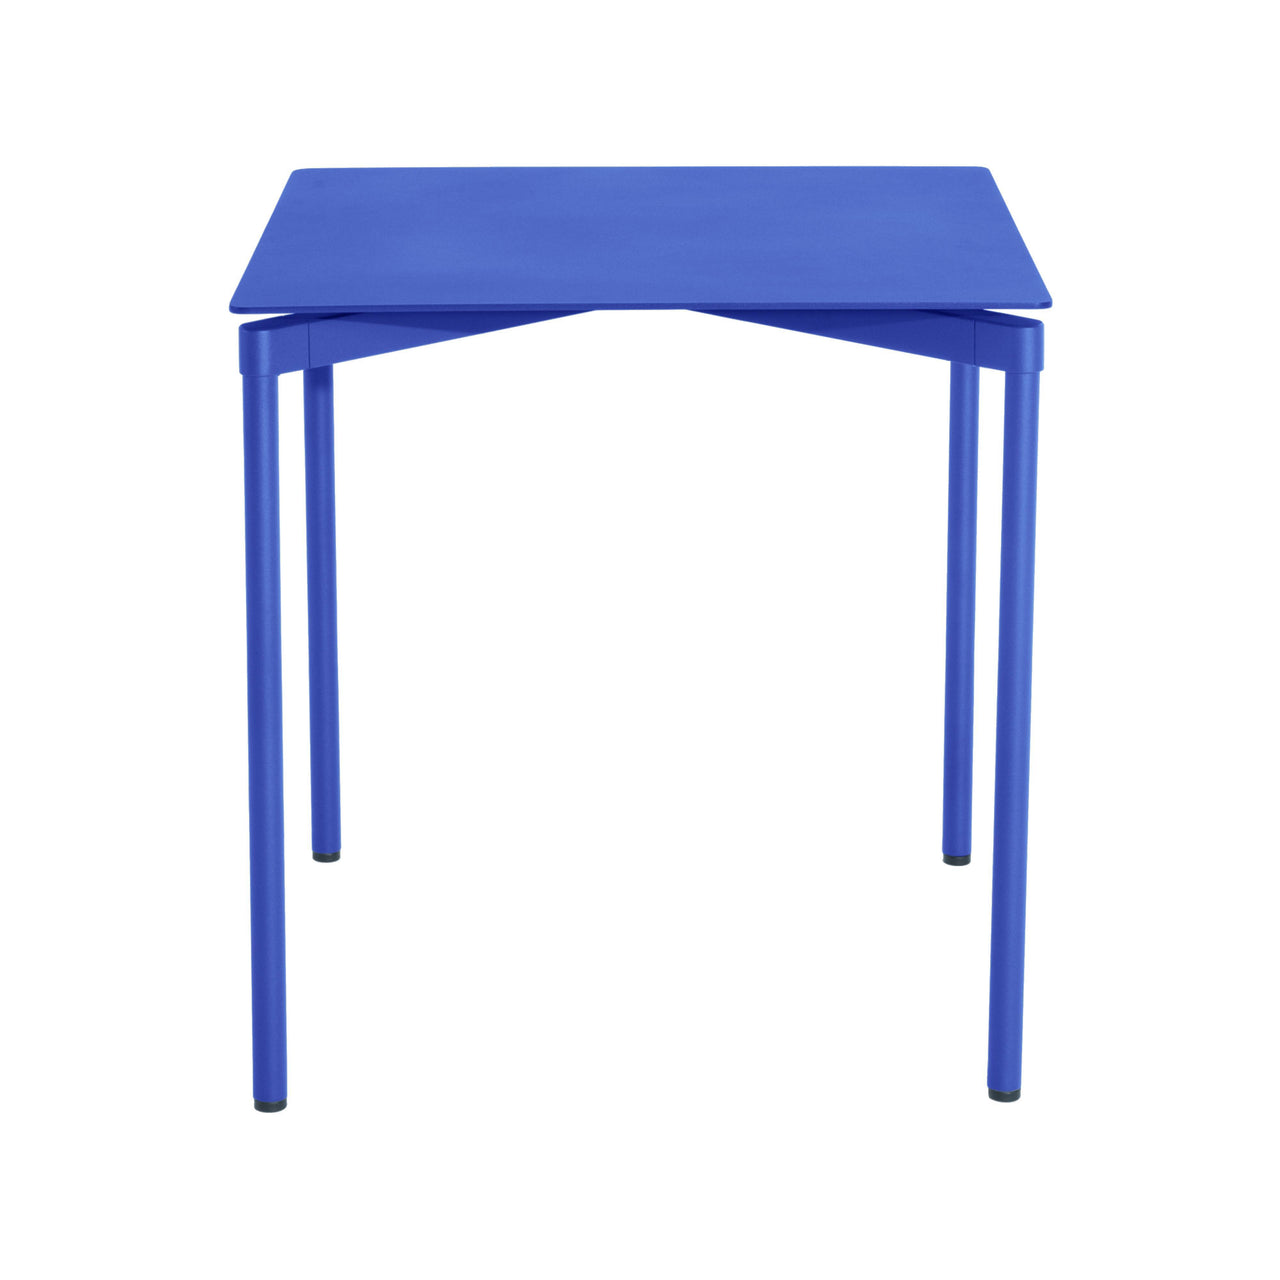 Fromme Table: Square + Blue